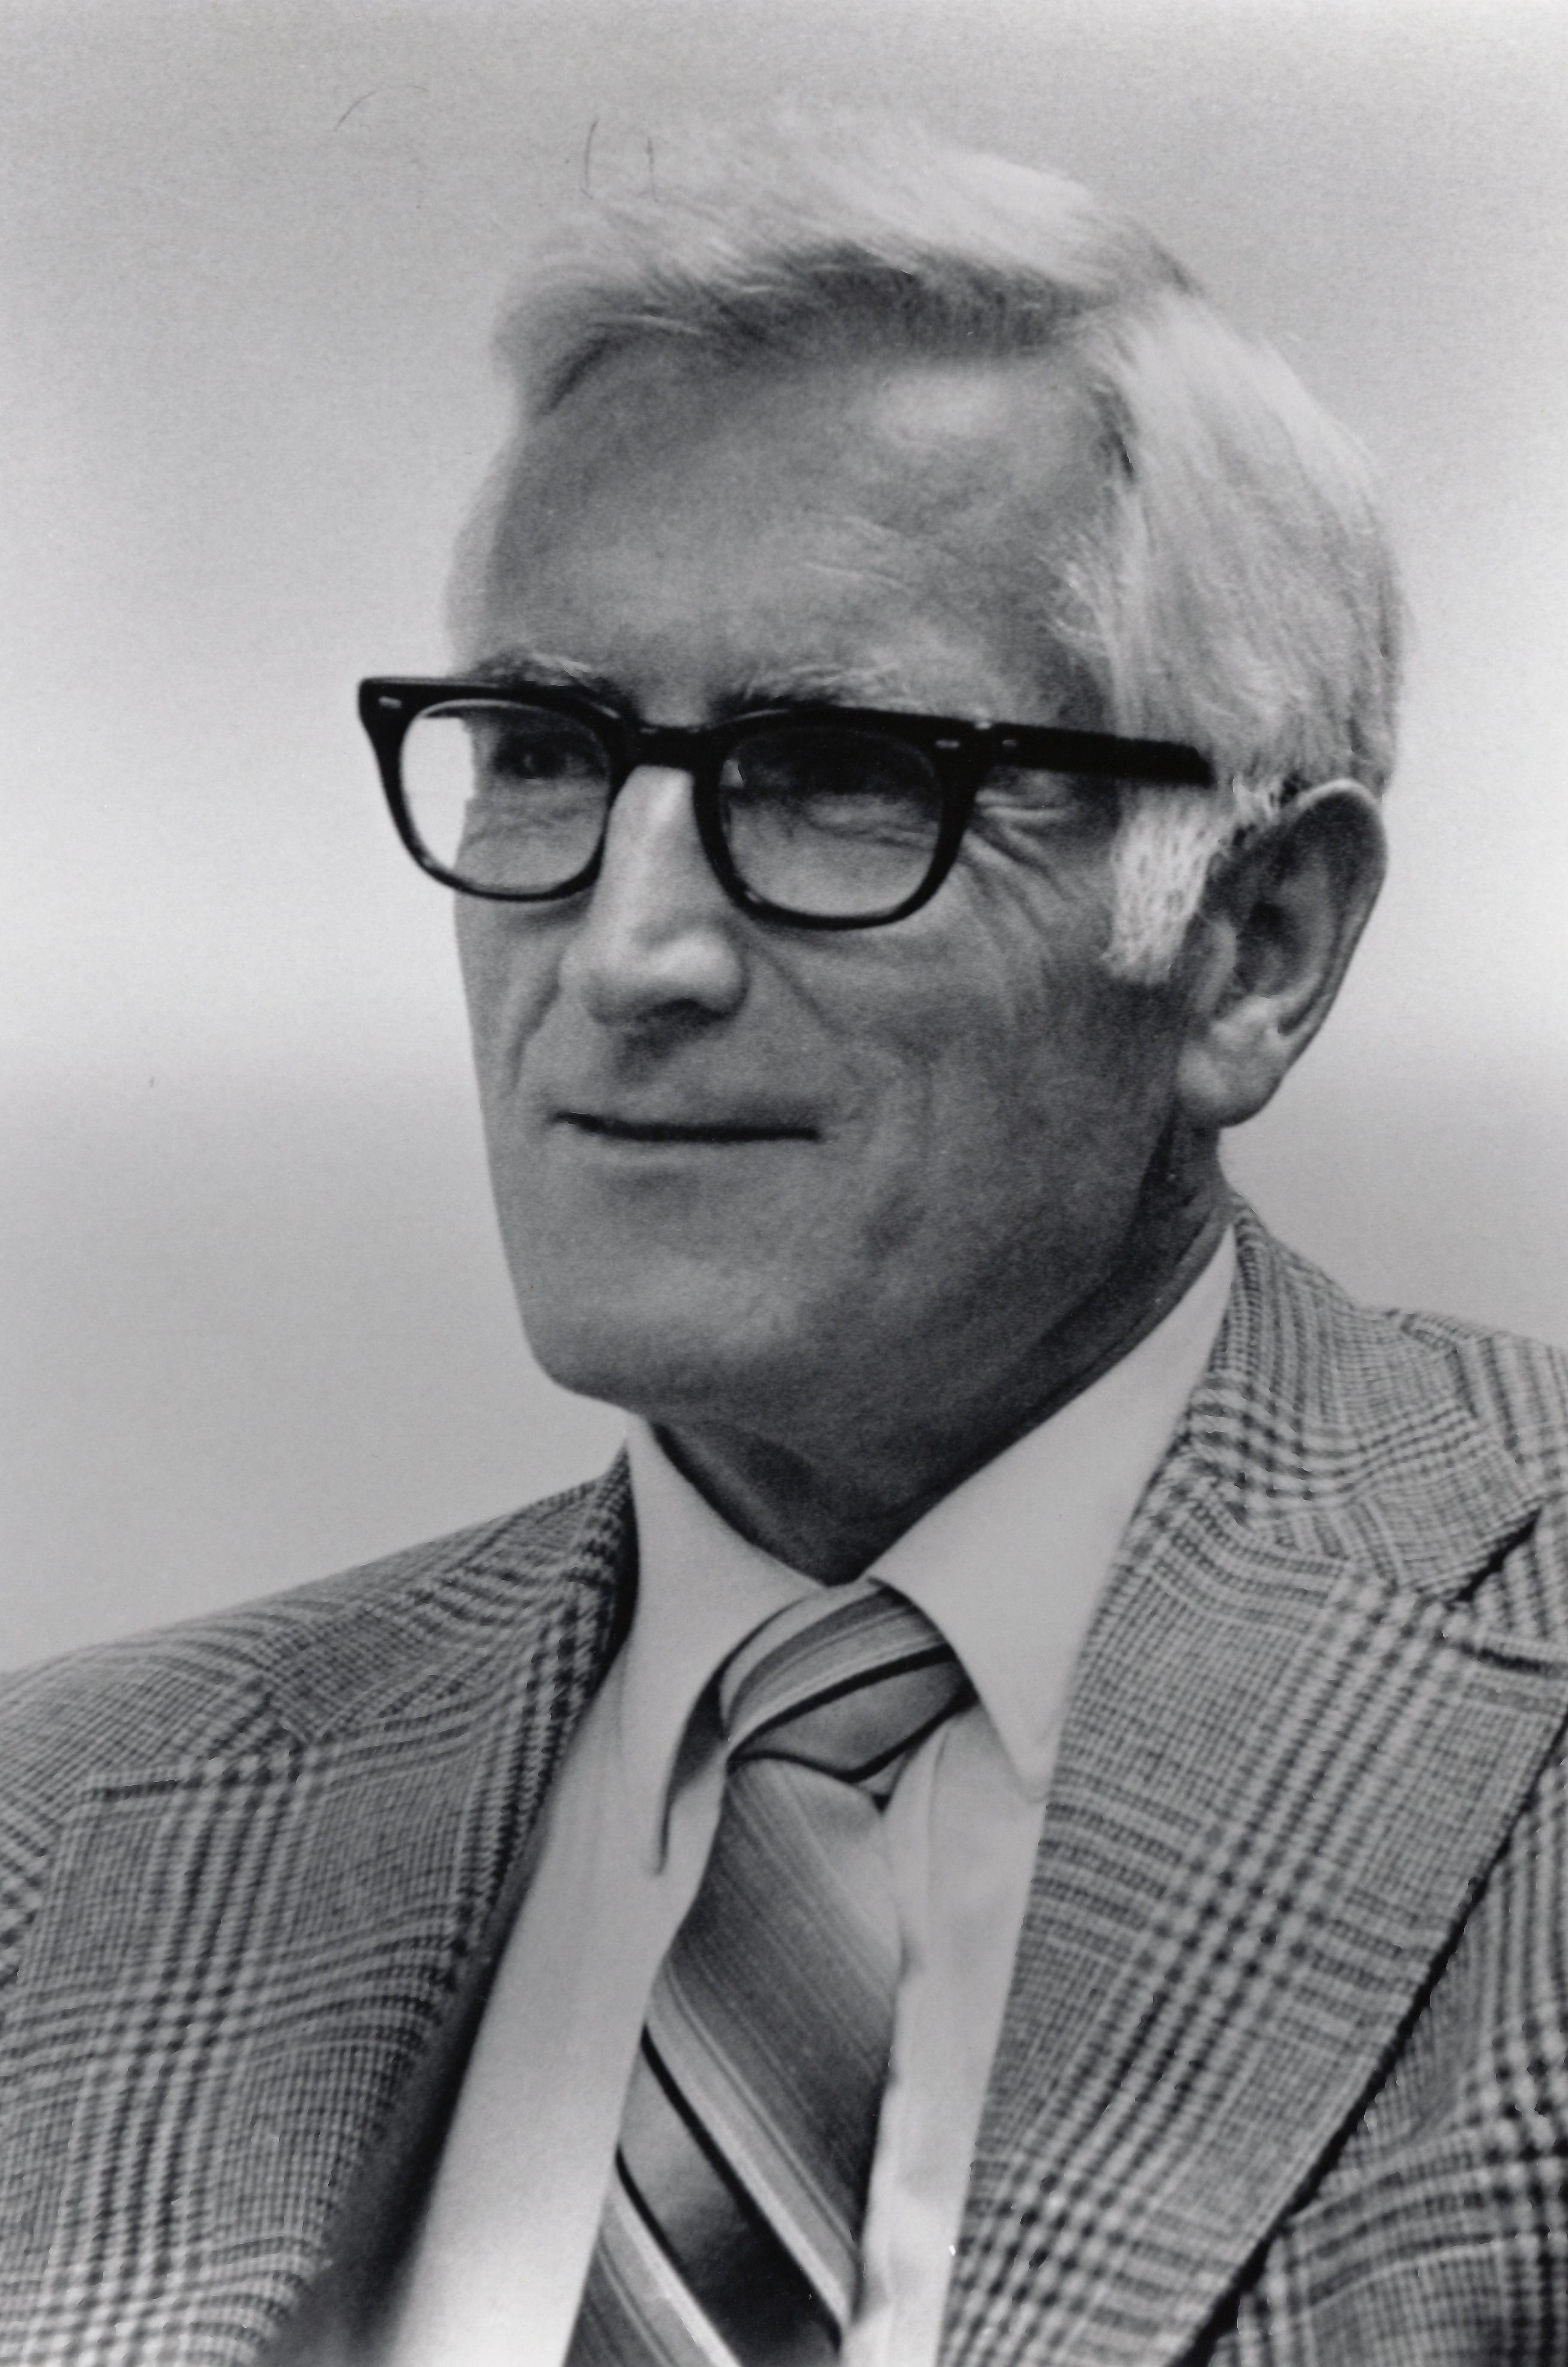 a black and white photo of a man with black glasses wearing a plaid suit and tie